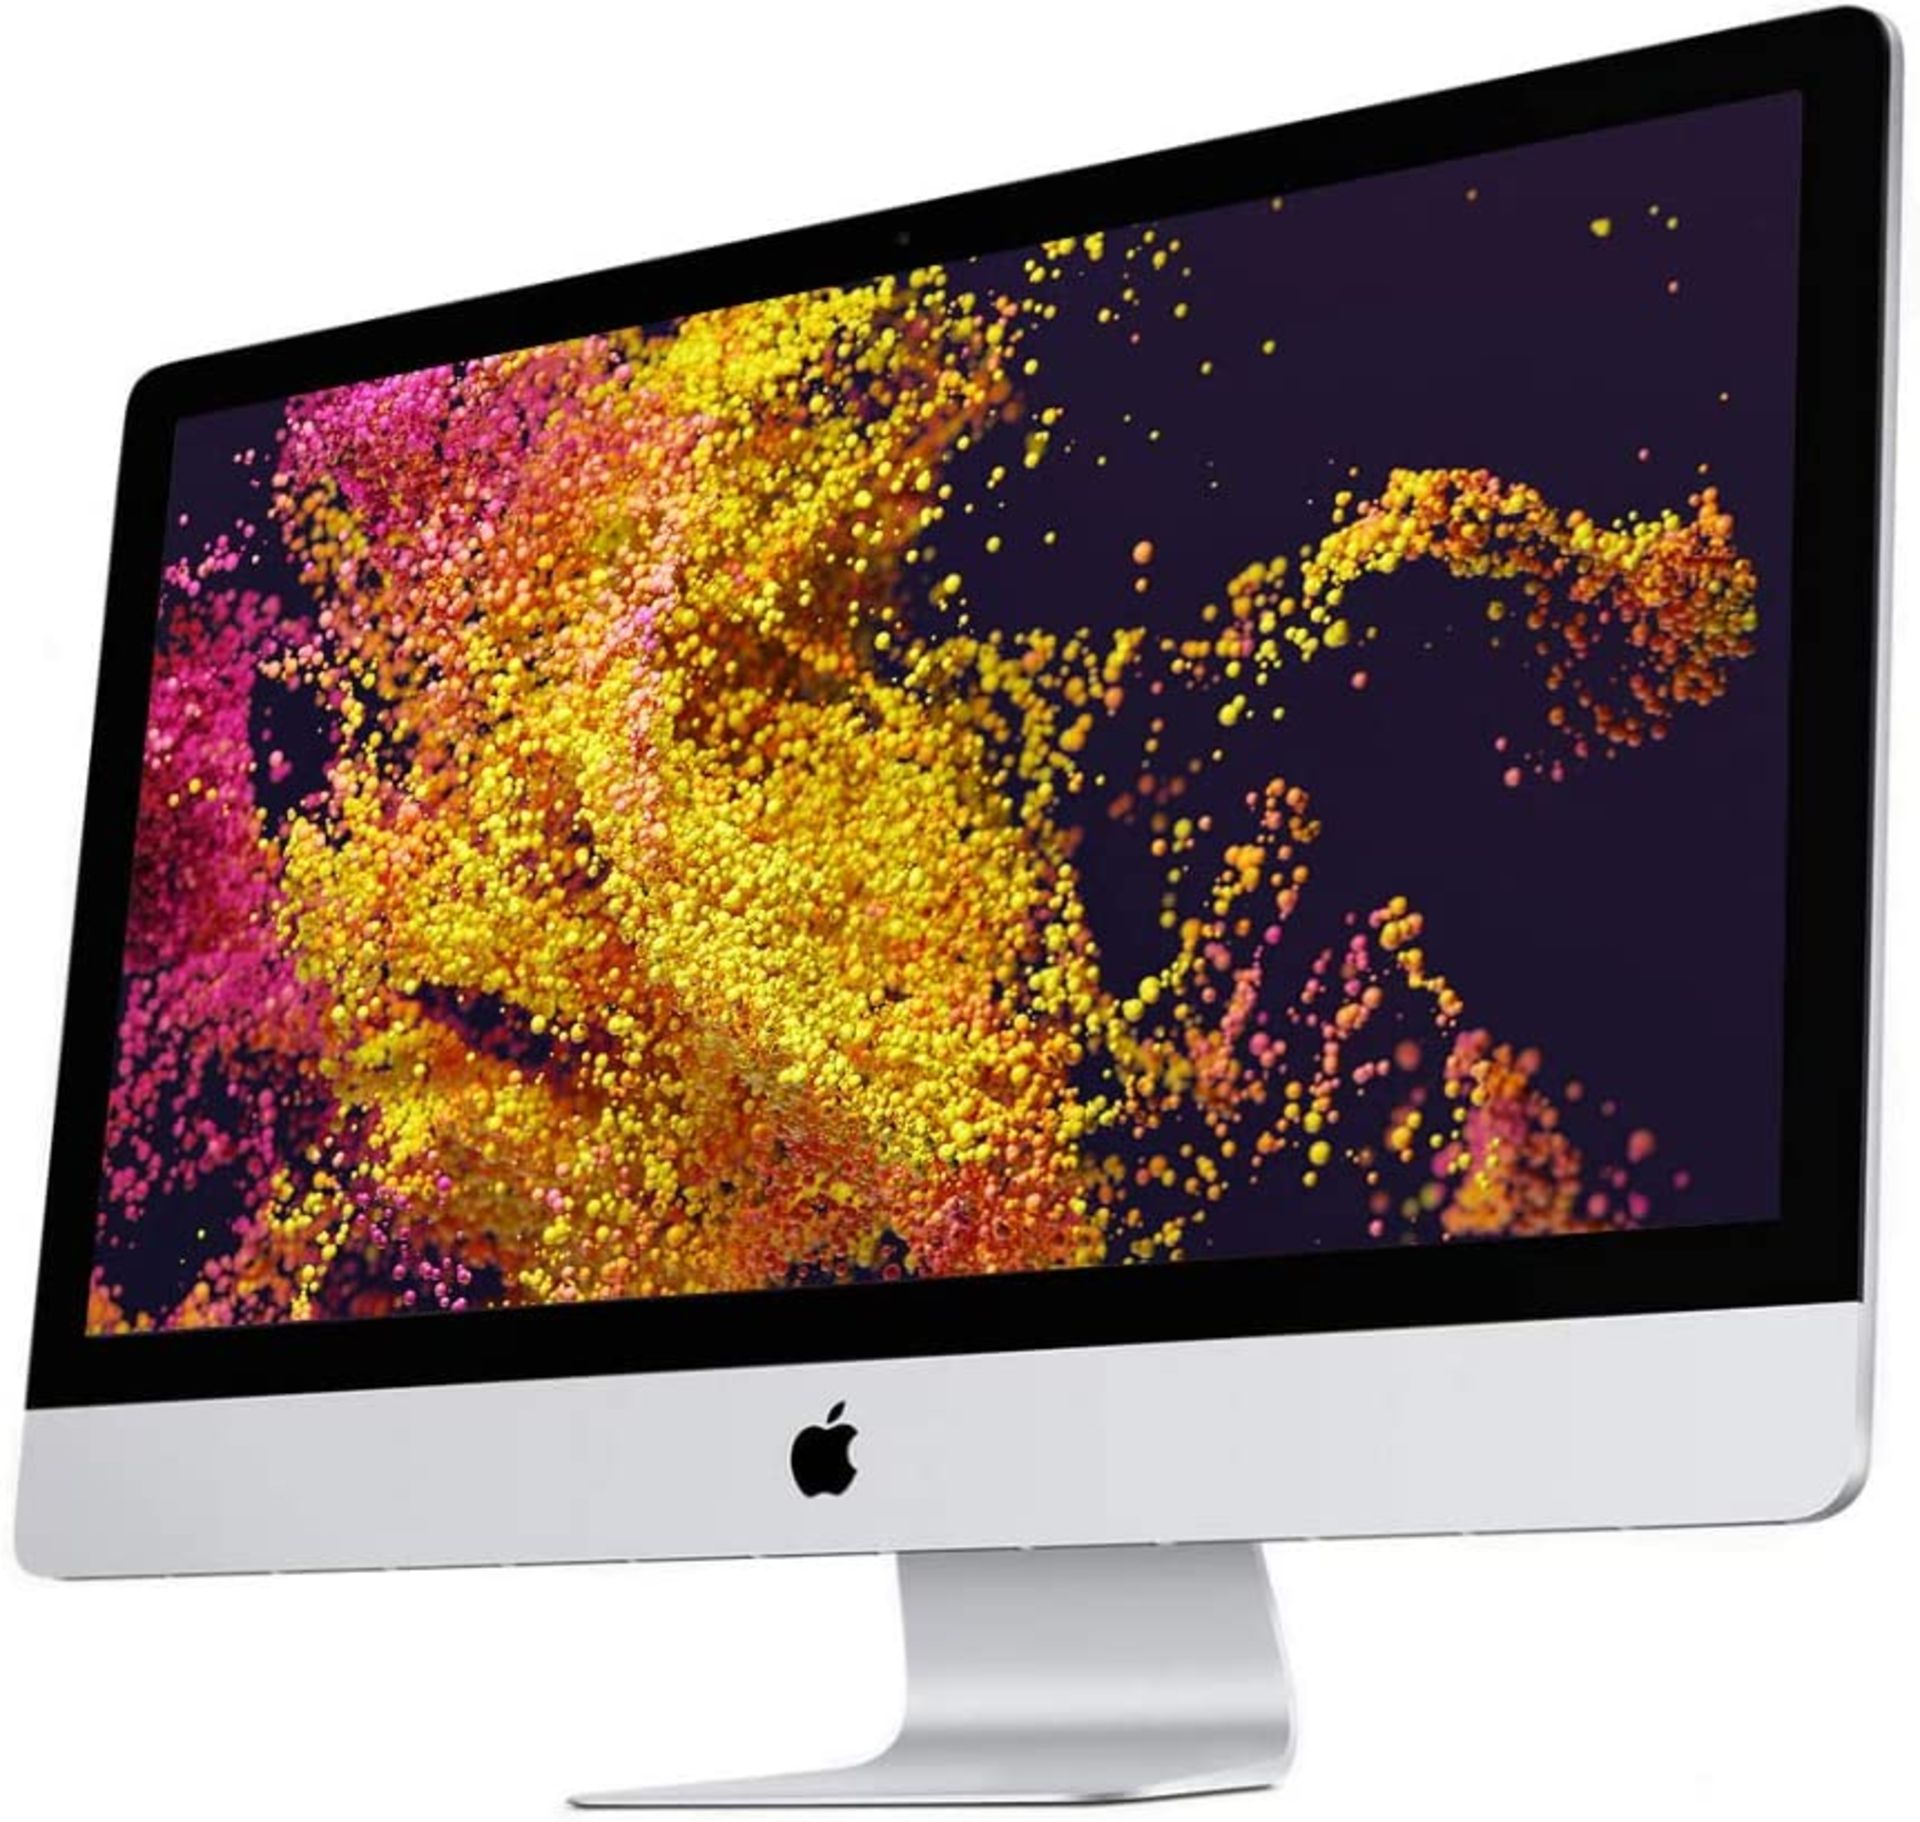 APPLE IMAC 21.5'' C2D 8GB 500GB GeForce. Complete Reset With Mac OS X, And Microsoft Office Pre